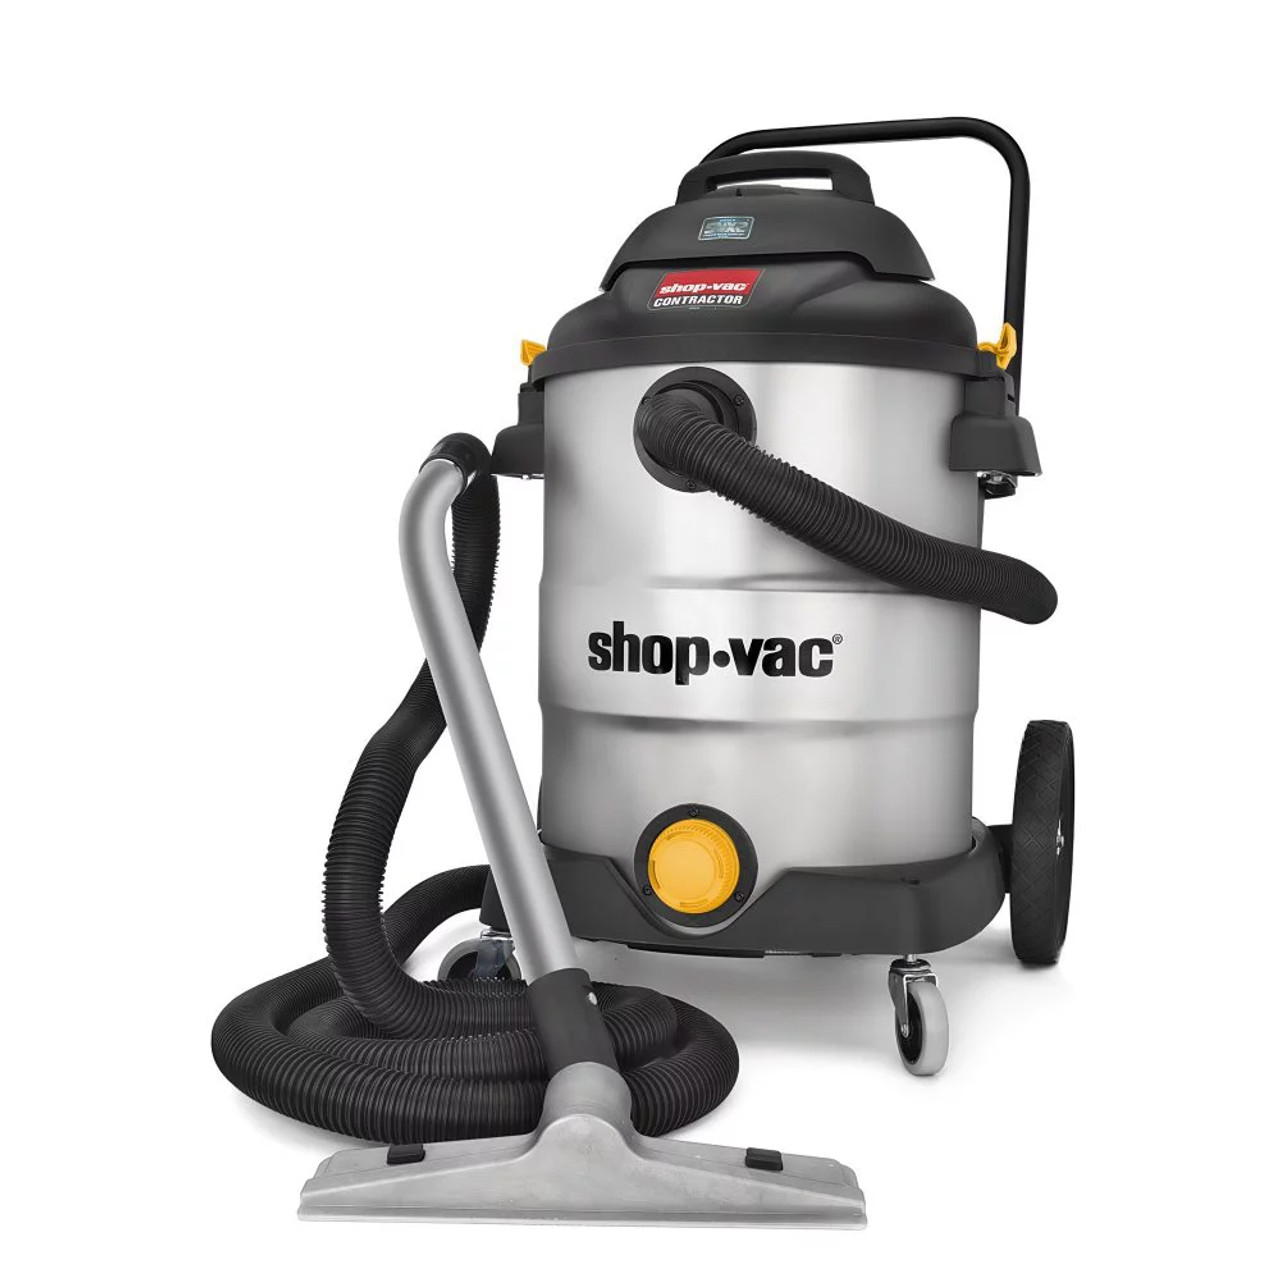 Shop-Vac 16 Gallon 6.0 Peak HP Carted Stainless Steel Wet Dry Vacuum with Tool Kit